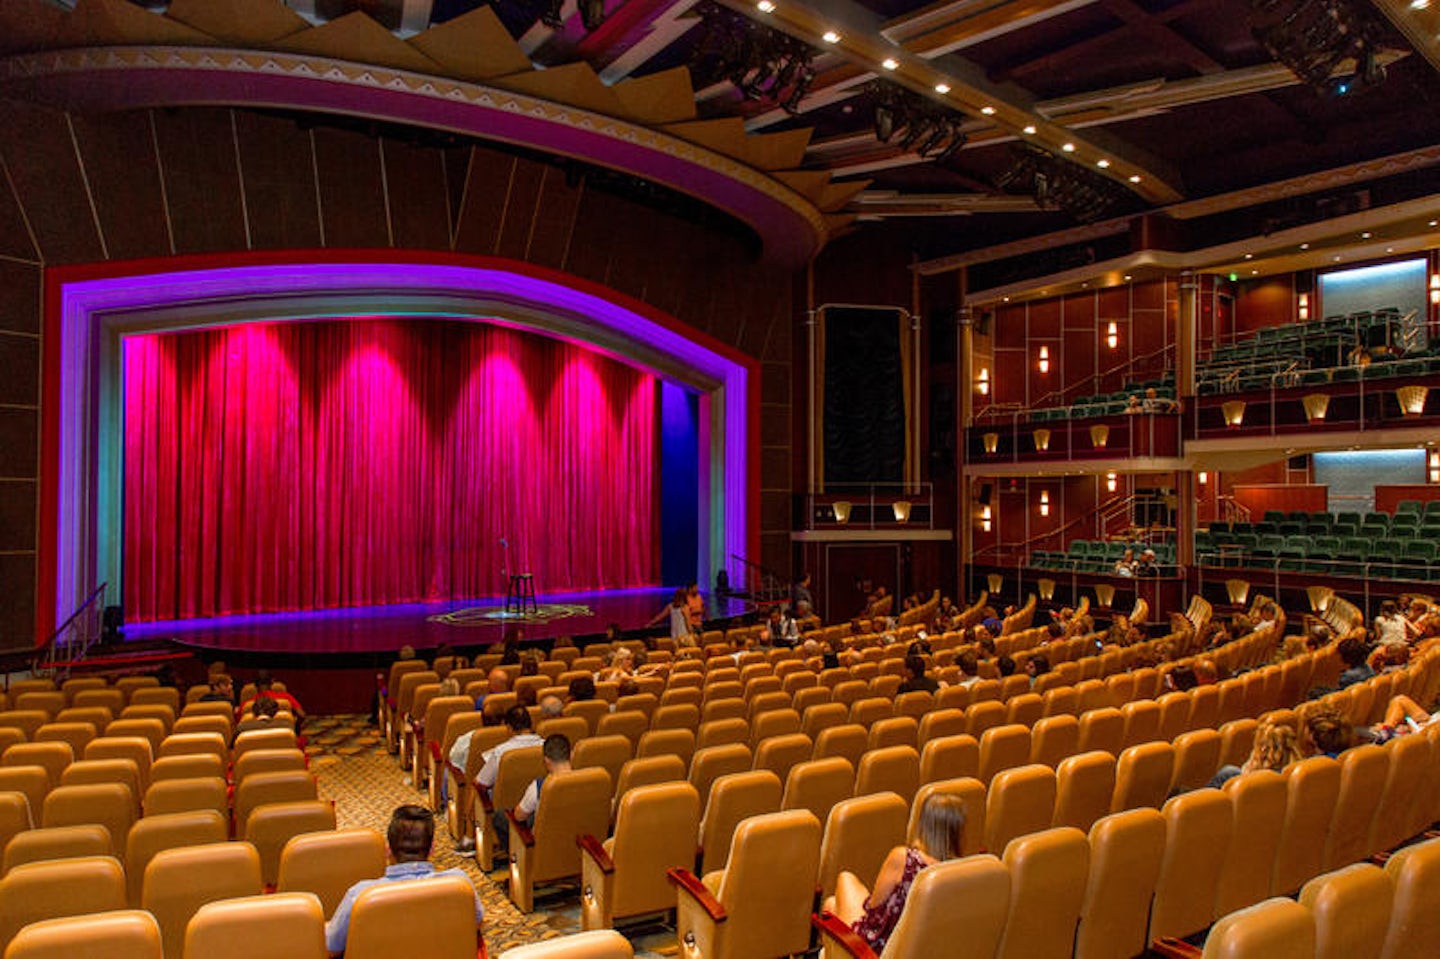 Royal Theater on Mariner of the Seas